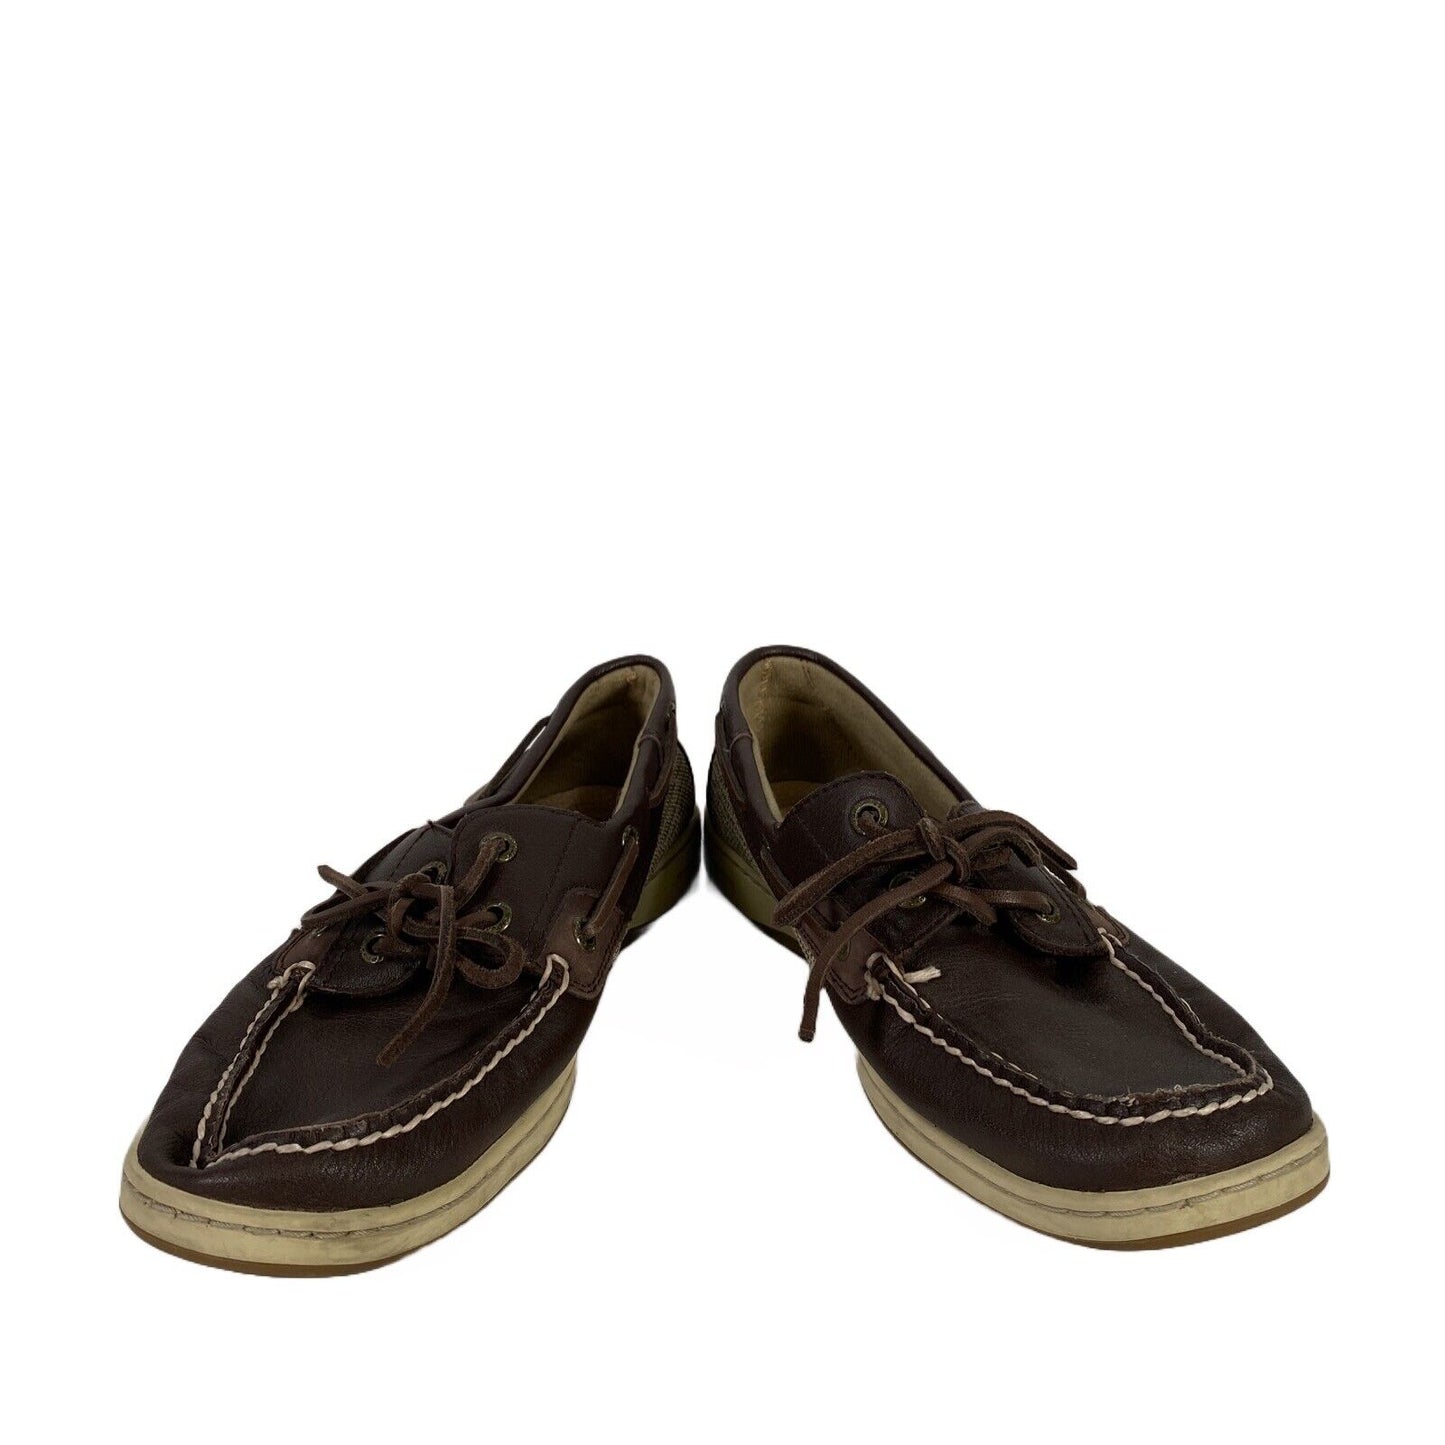 Sperry Women's Brown Leather Lace Up Boat Shoes - 9 M